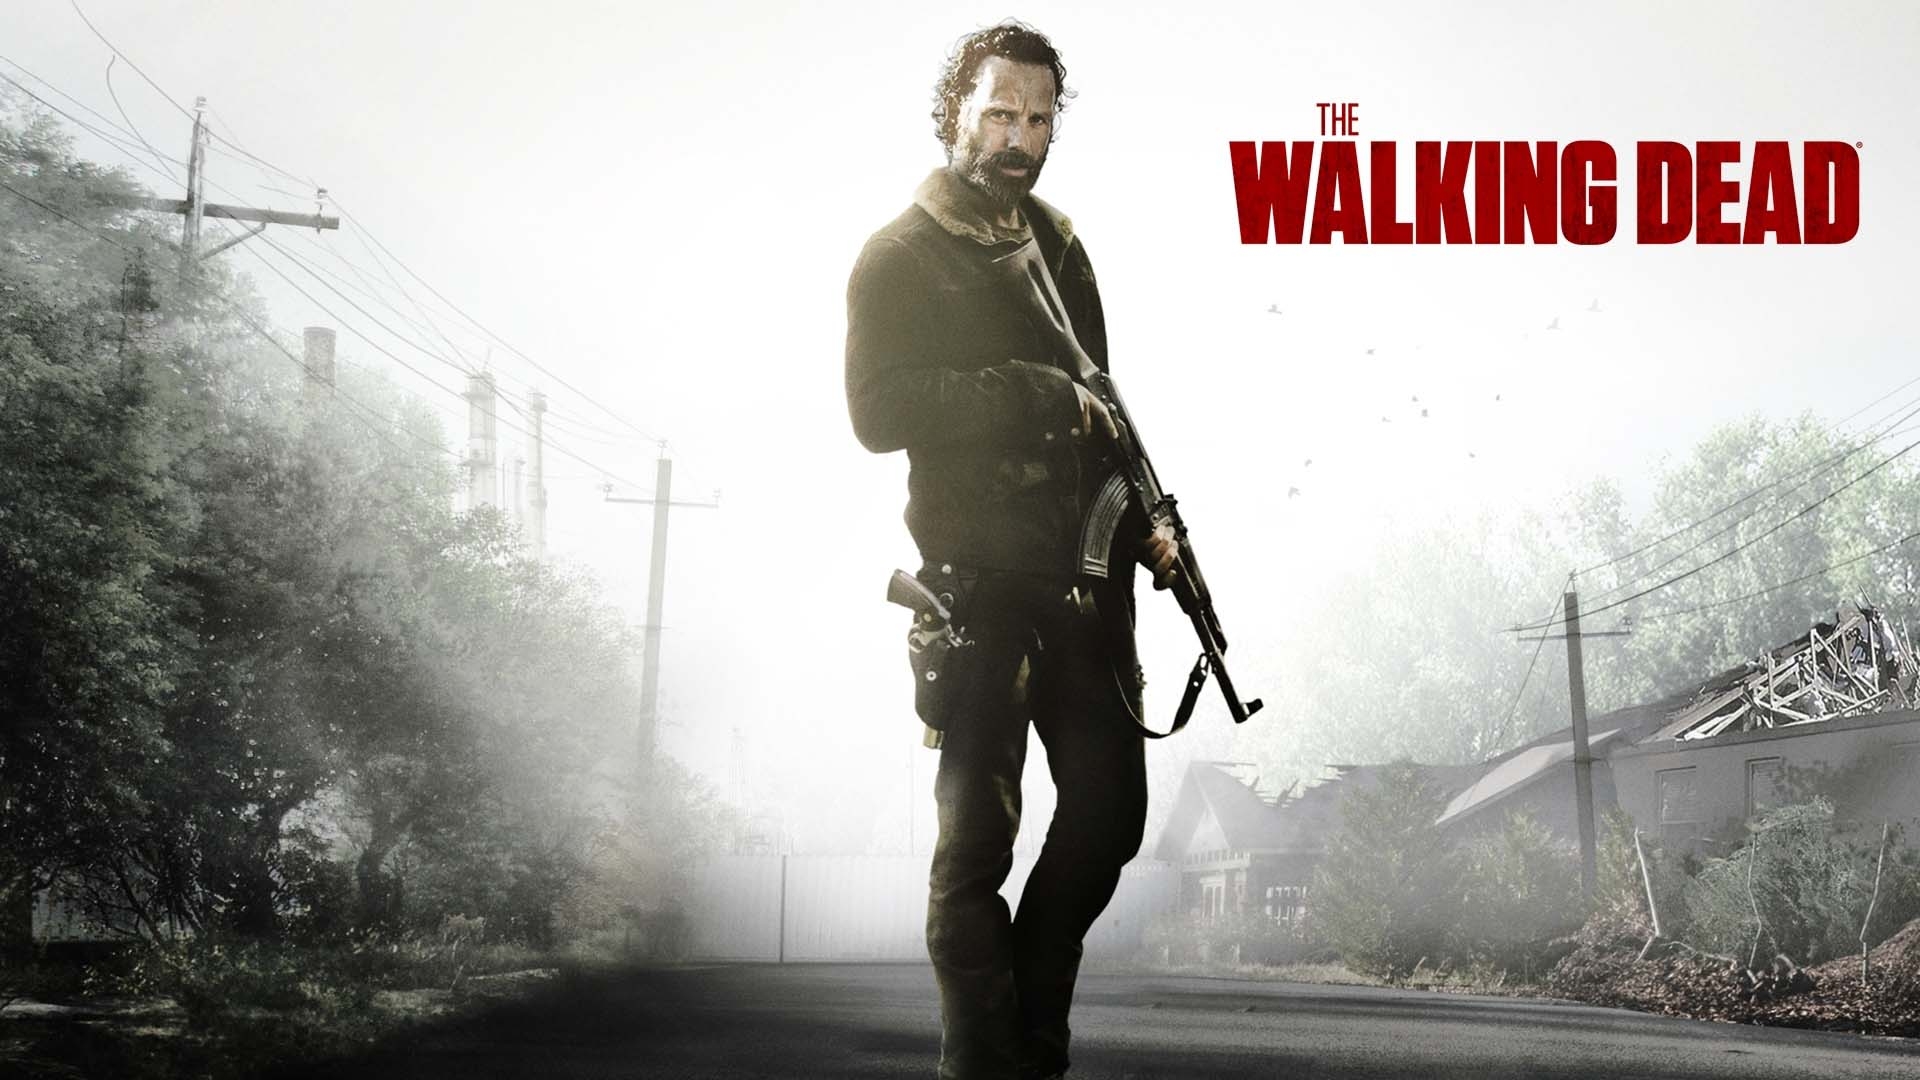 the walking dead wallpaper 1920x1080,movie,atmospheric phenomenon,soldier,action film,poster